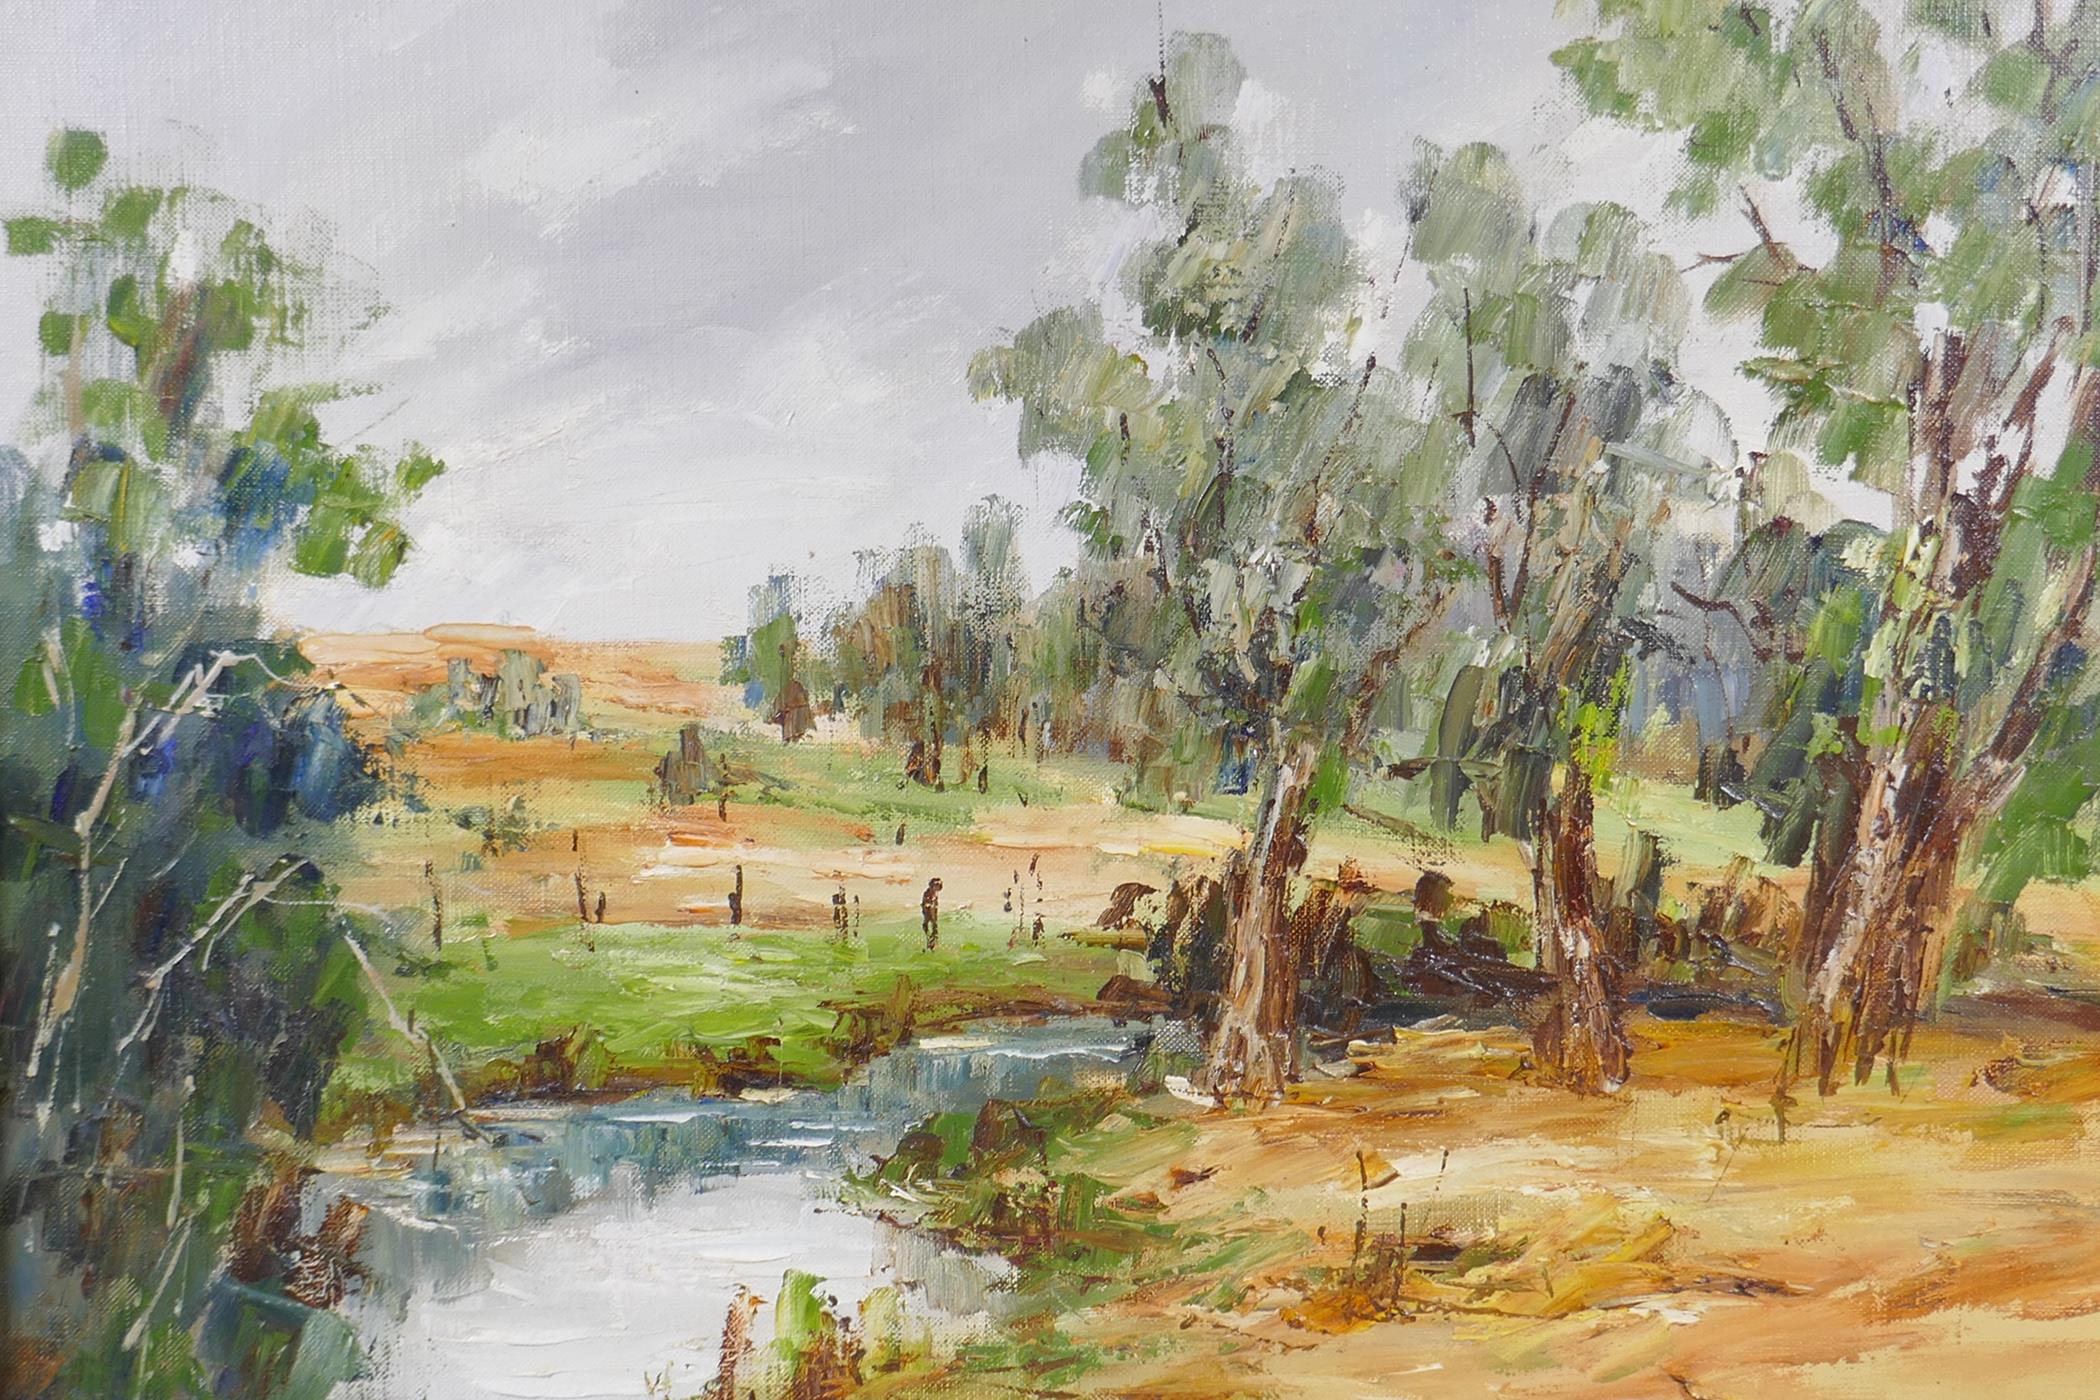 Etienne Bellan, (French, 1922-2000), landscape with a stream, possibly French Africa, 55cm x 46cm